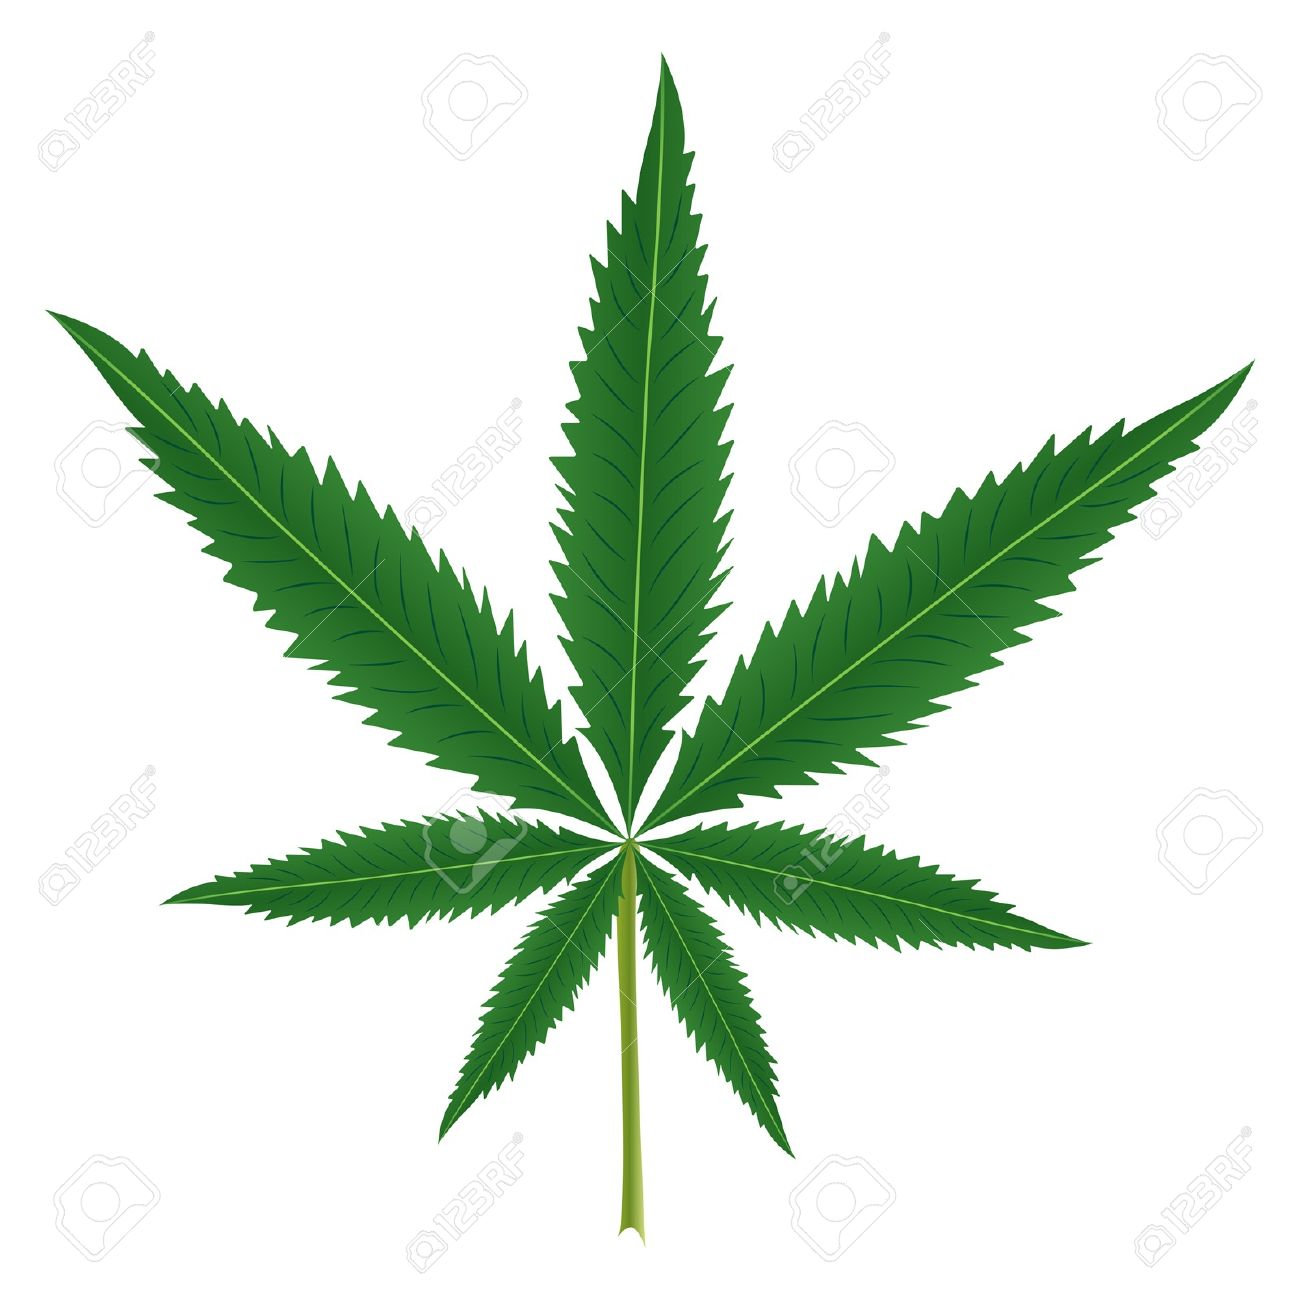 Cannabis clipart #1, Download drawings